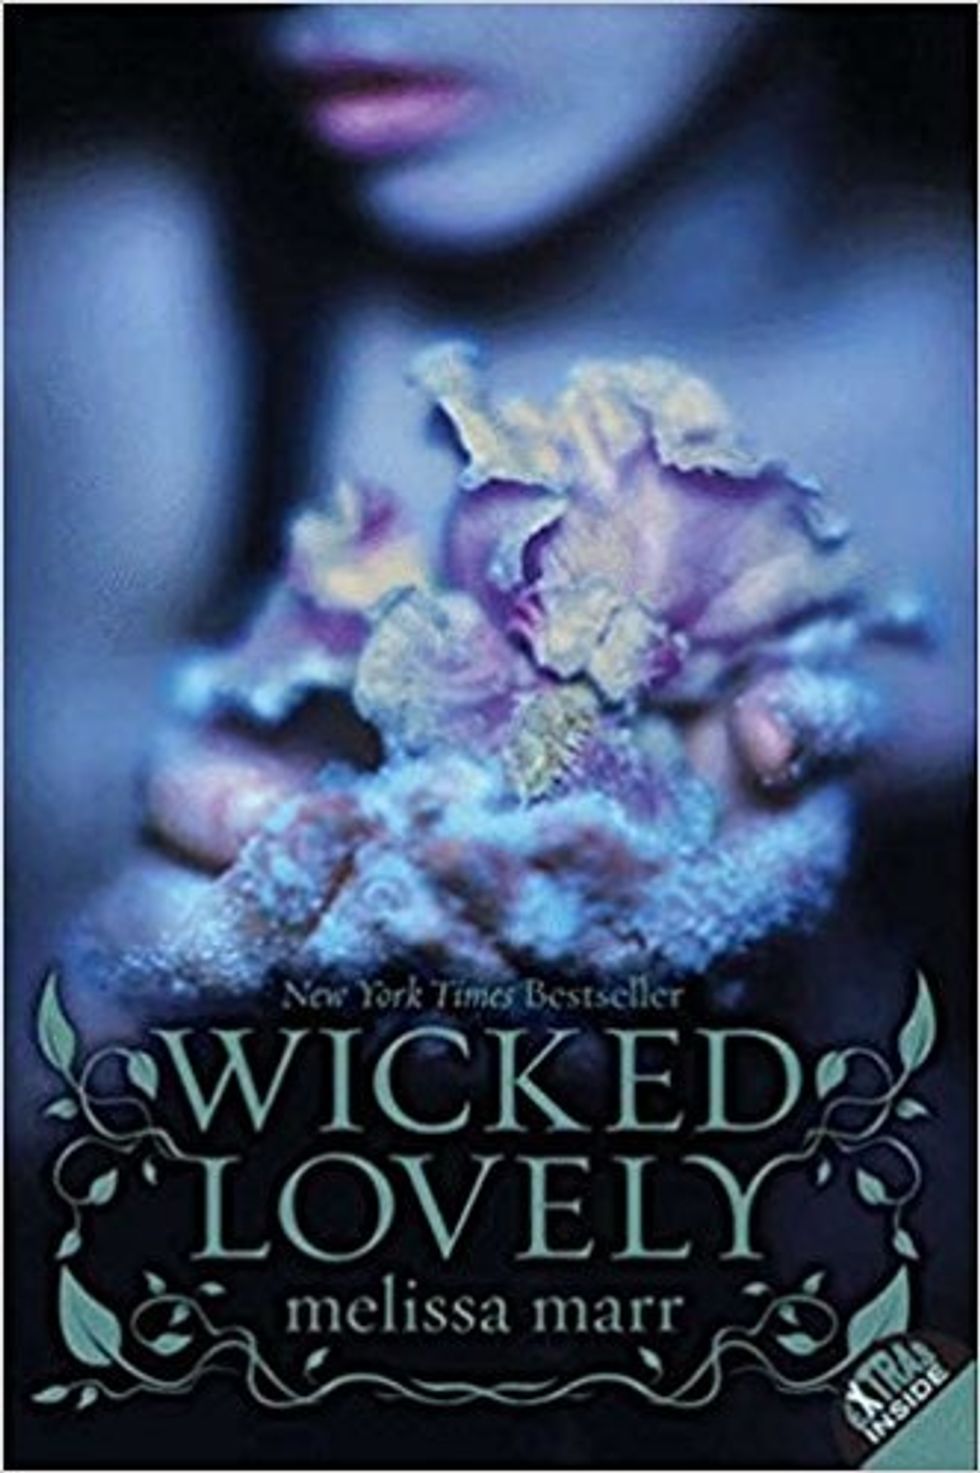 Throwback Review of Wicked Lovely by Melissa Marr